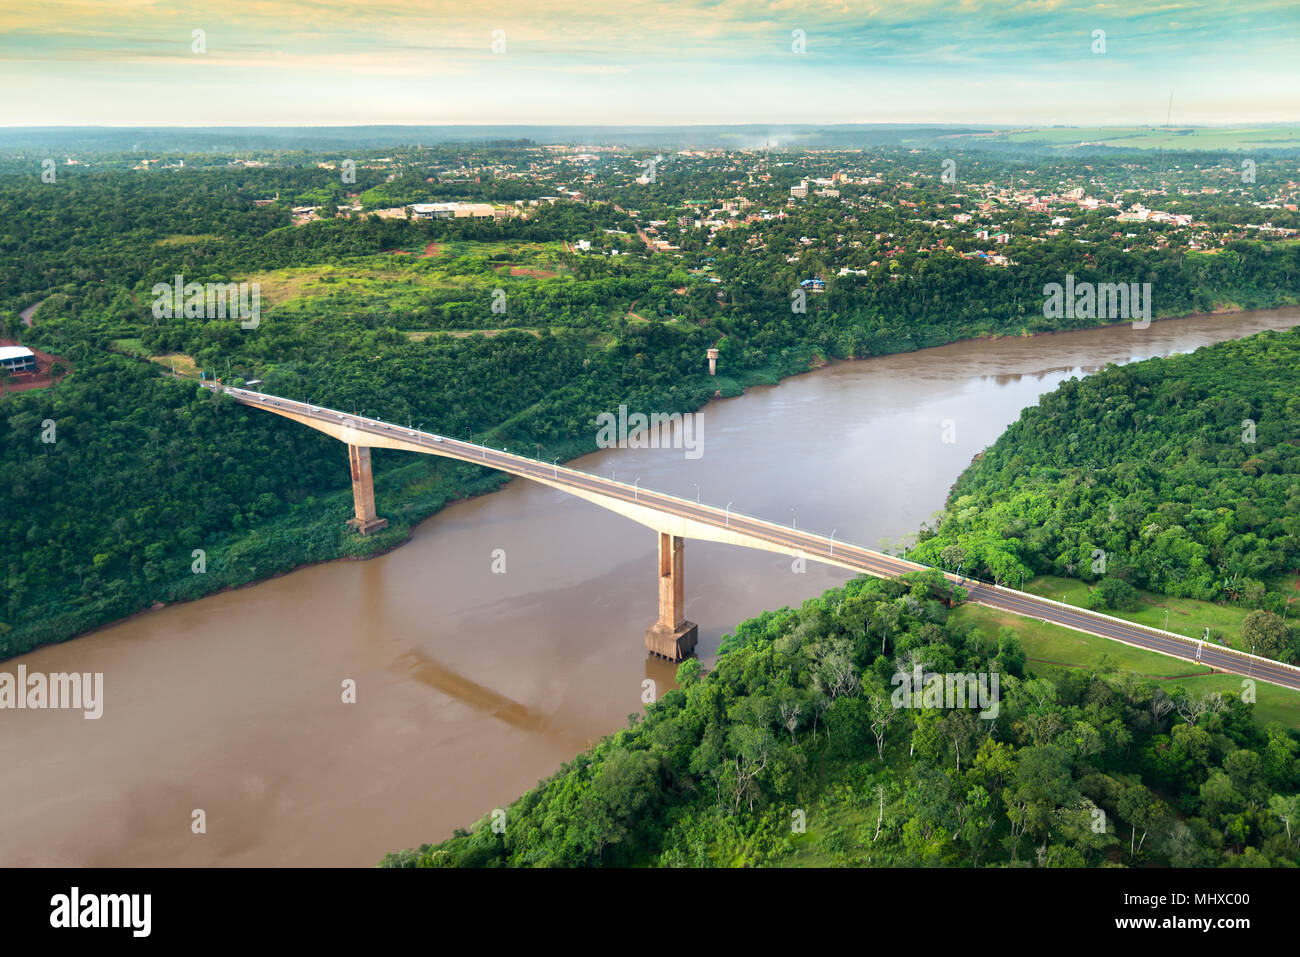 Aerial view of The Tancredo Neves Bridge, better known as Fraternity Bridge connecting Brazil and Argentina through the border over the Iguassu River, Stock Photo